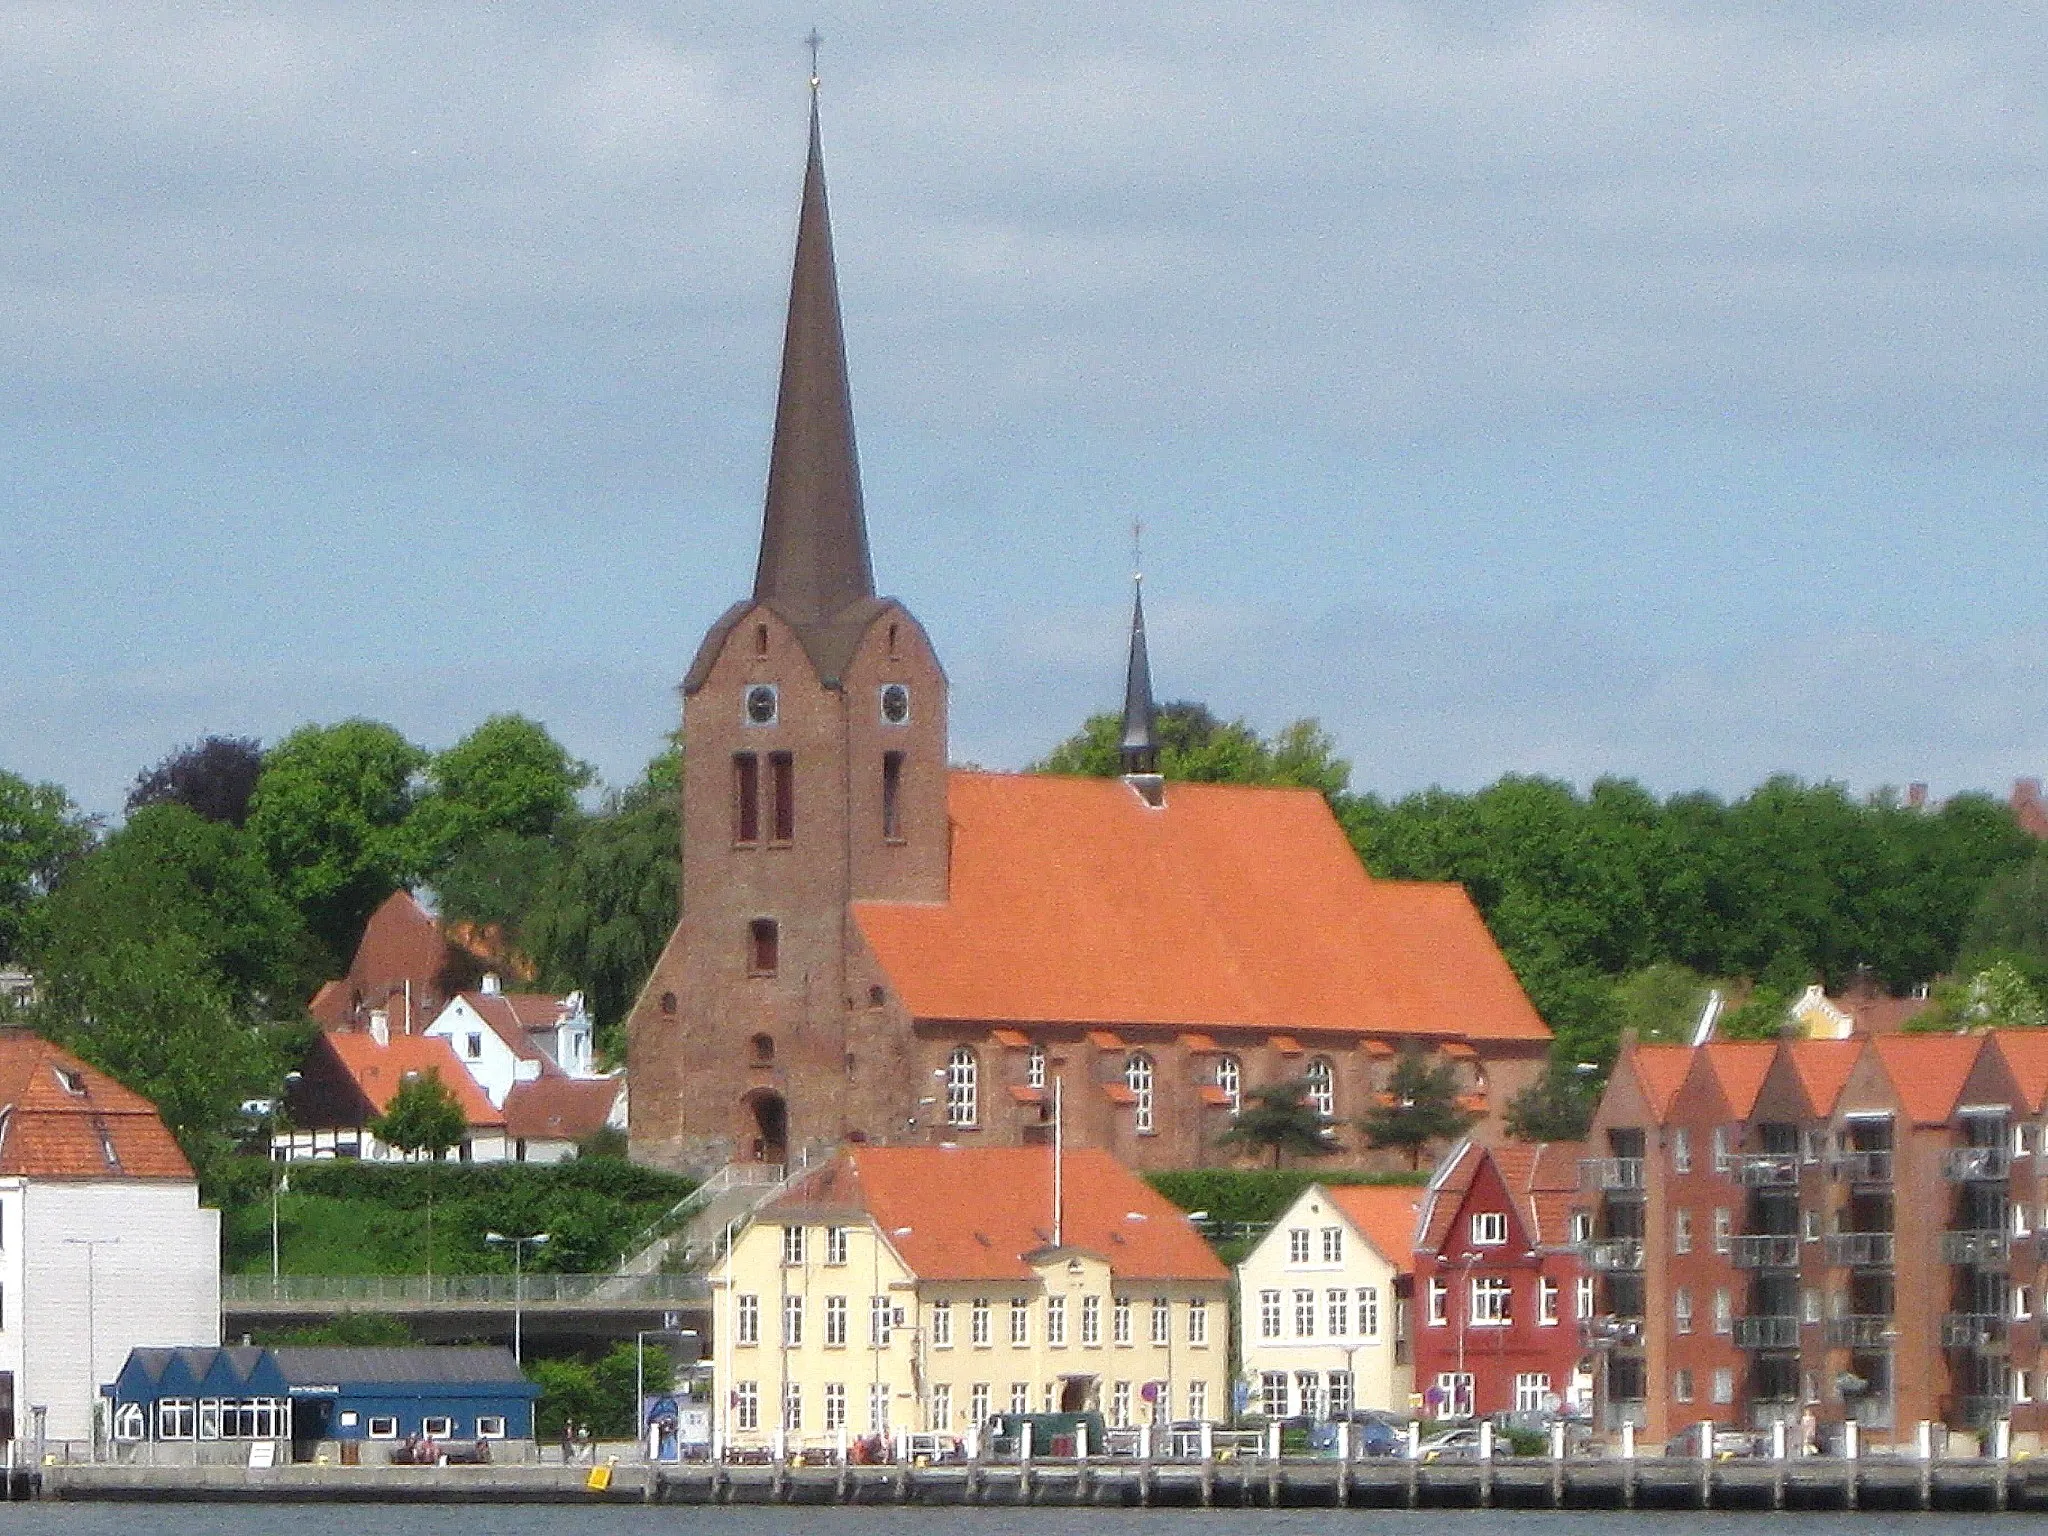 Photo showing: The church "Skt. Marie Kirke" in the town "Sønderborg". The town is located partly on the island of Als, partly in Southern Jutland, Denmark.